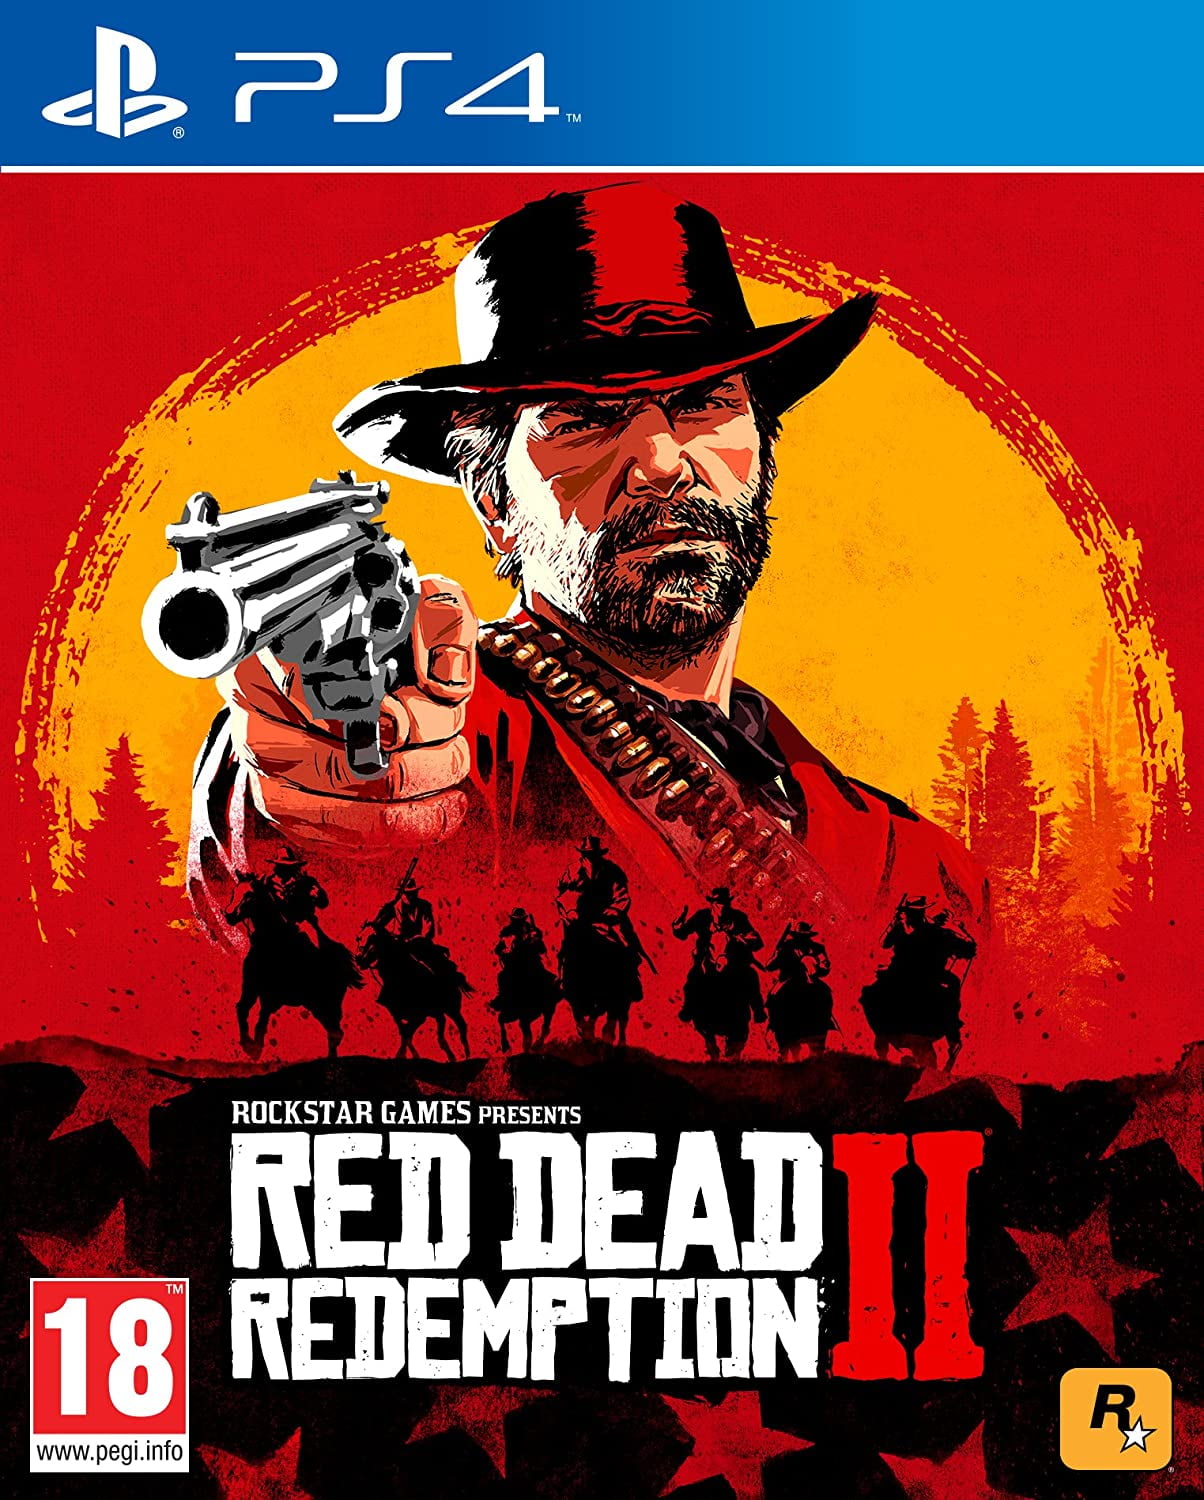 Red Dead Redemption 2 (PS4), From the creators of Grand Theft Auto V and Red Dead Redemption By Brand Rockstar Games